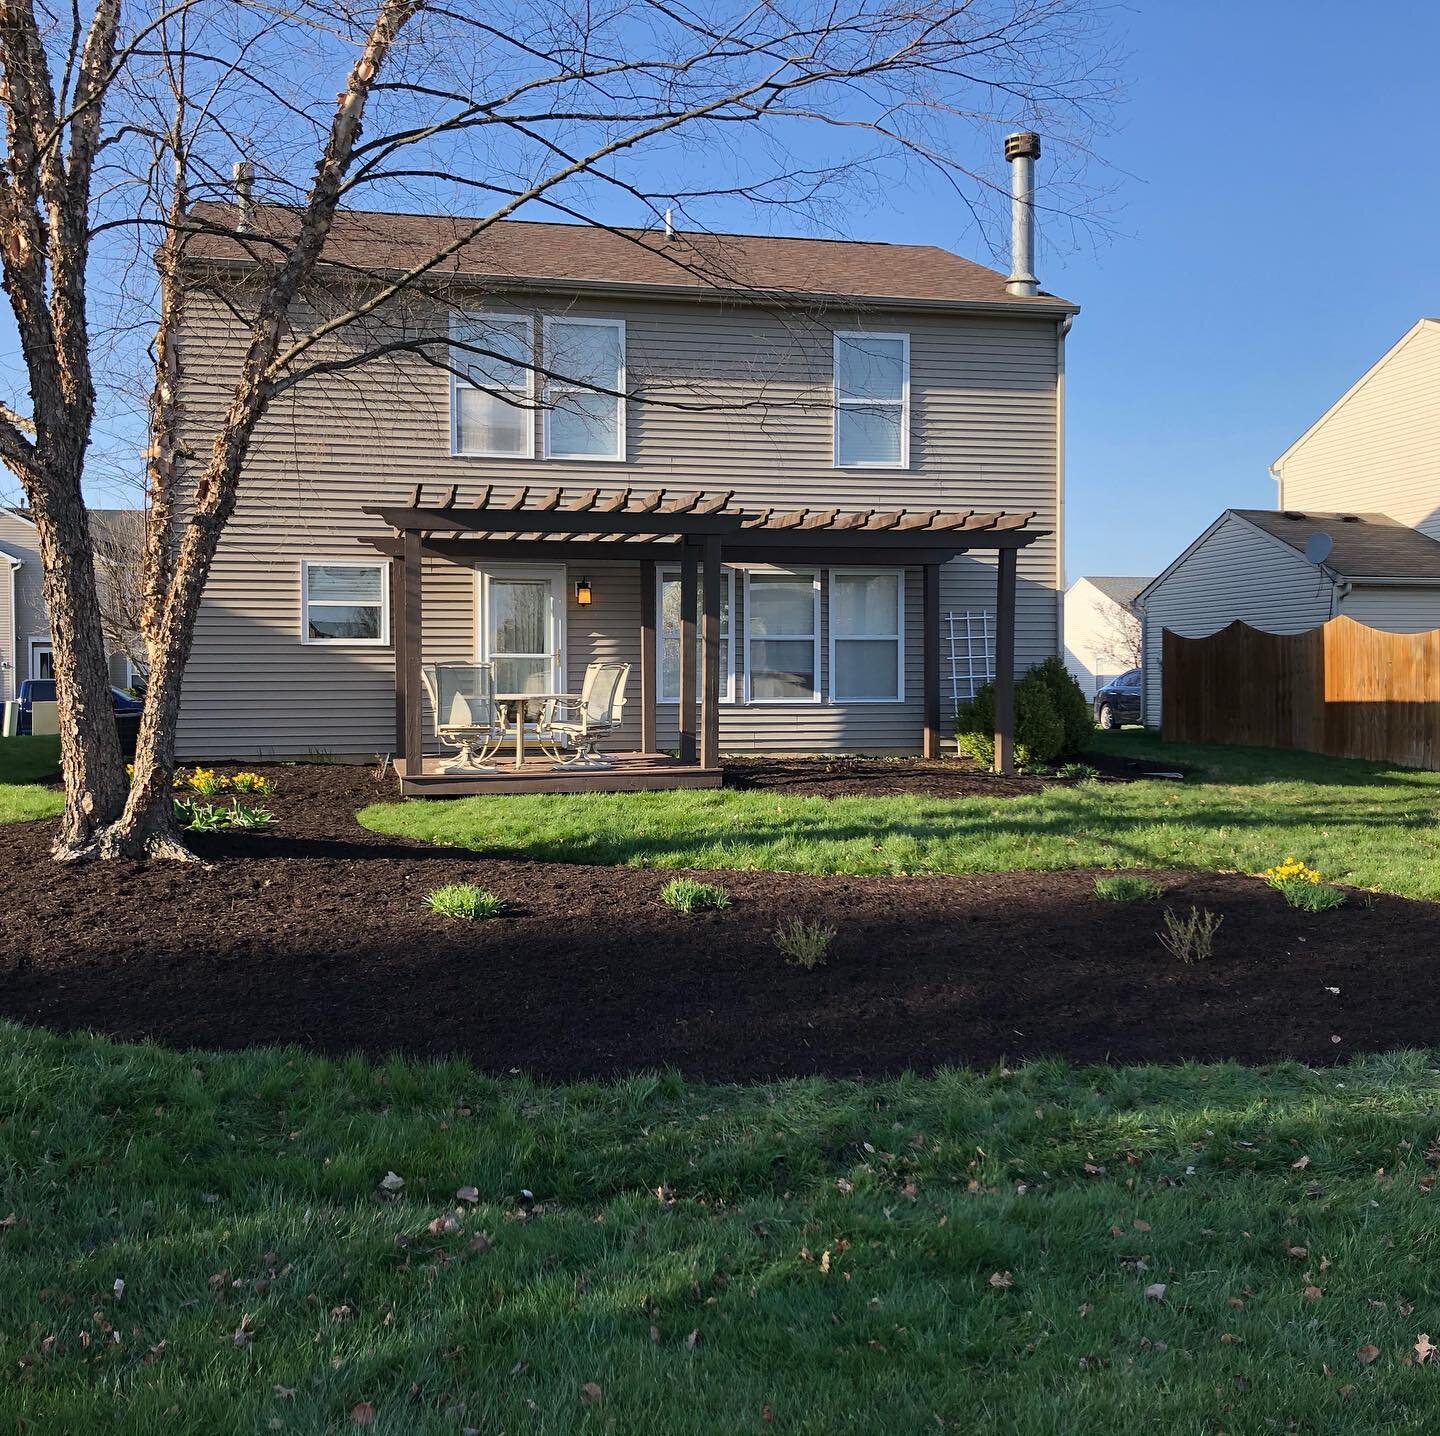 Refreshed mulch beds